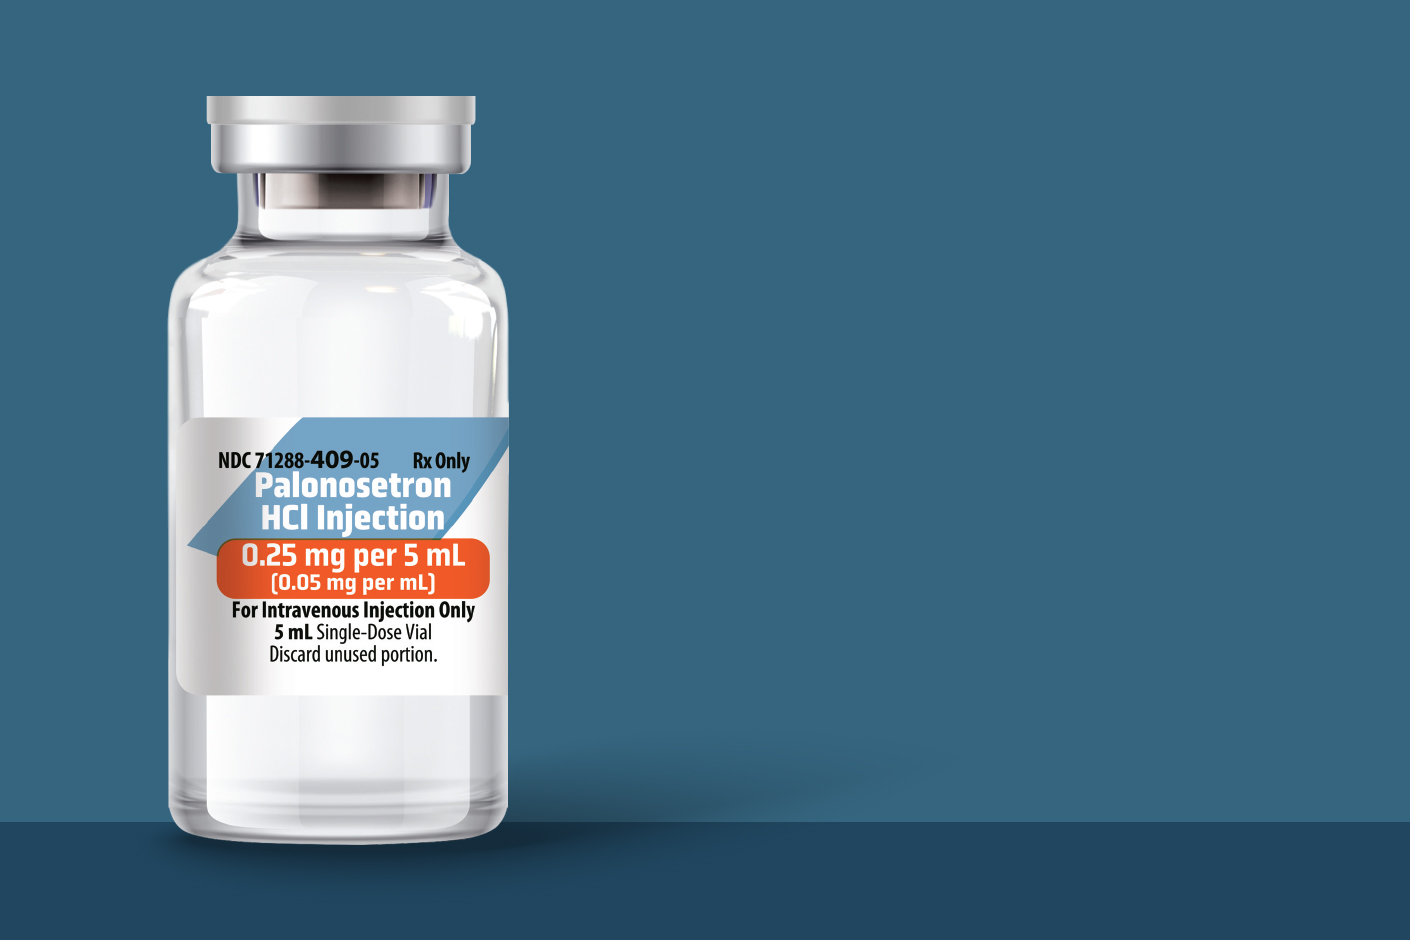 Palonosetron Hydrochloride Injection Now Available